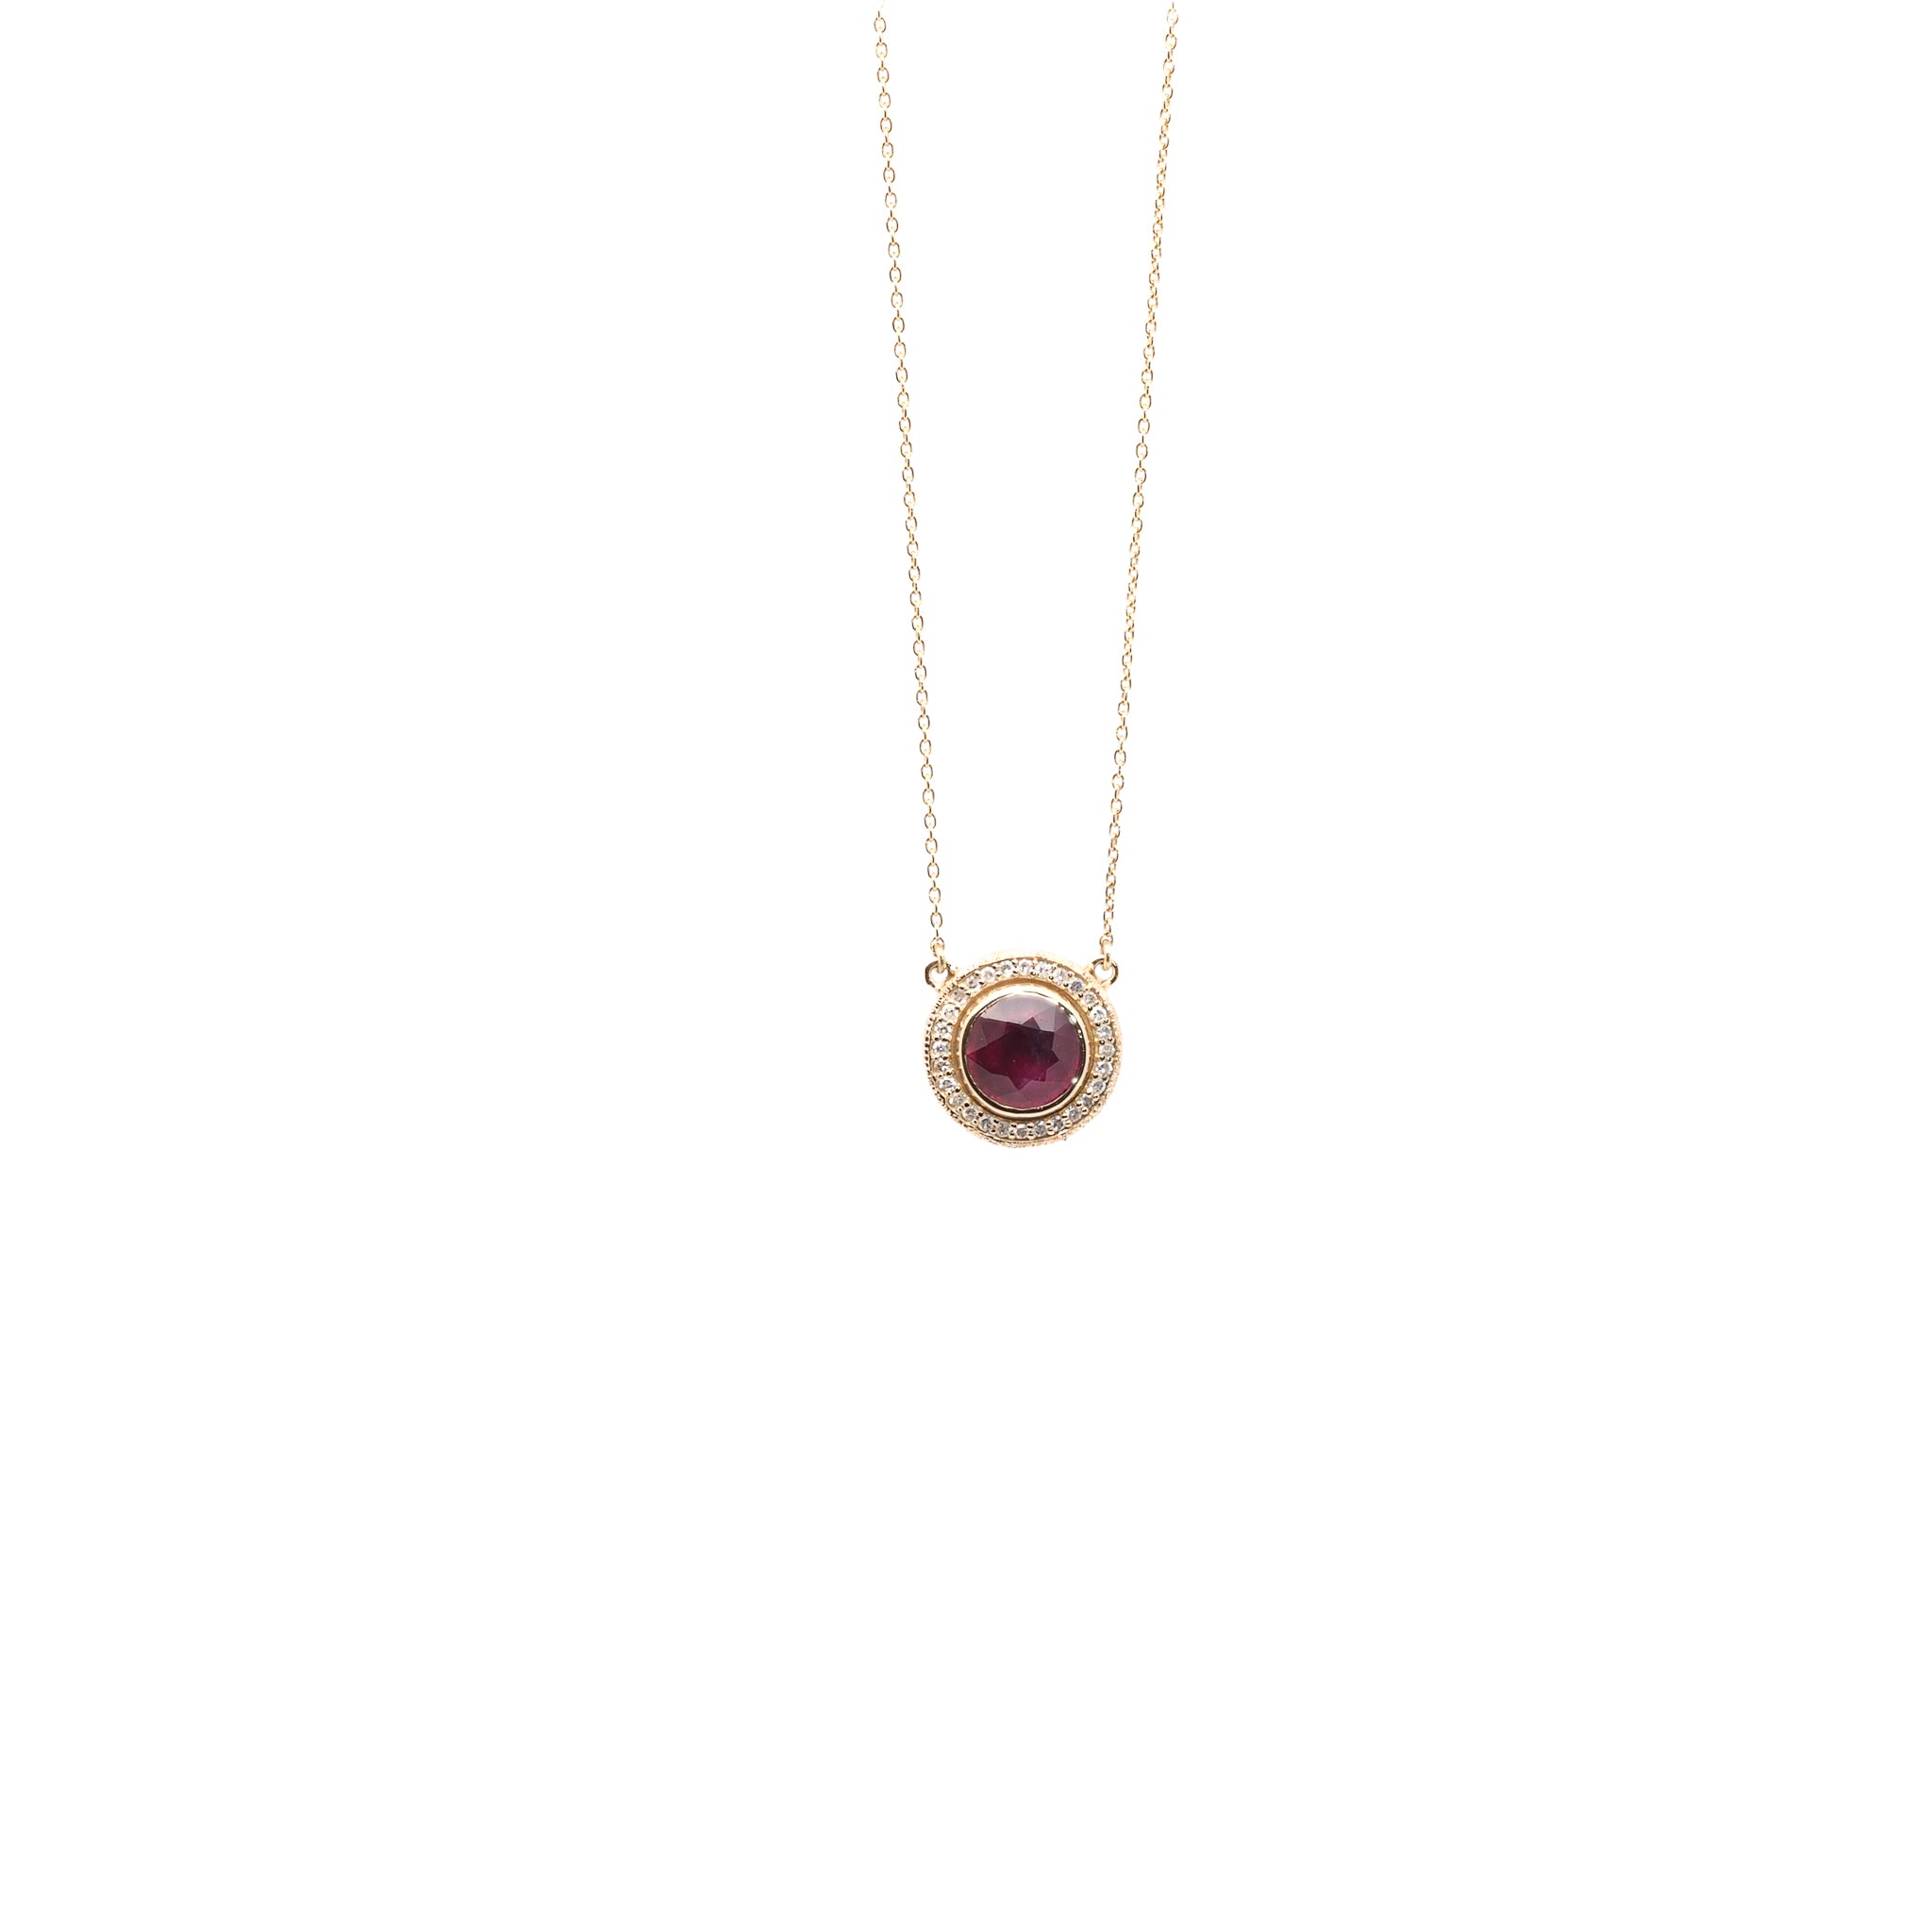 the Elegant Ruby &amp; Diamond Necklace, highlighting the intricate details of the pendant and the delicate 18&quot; gold chain.